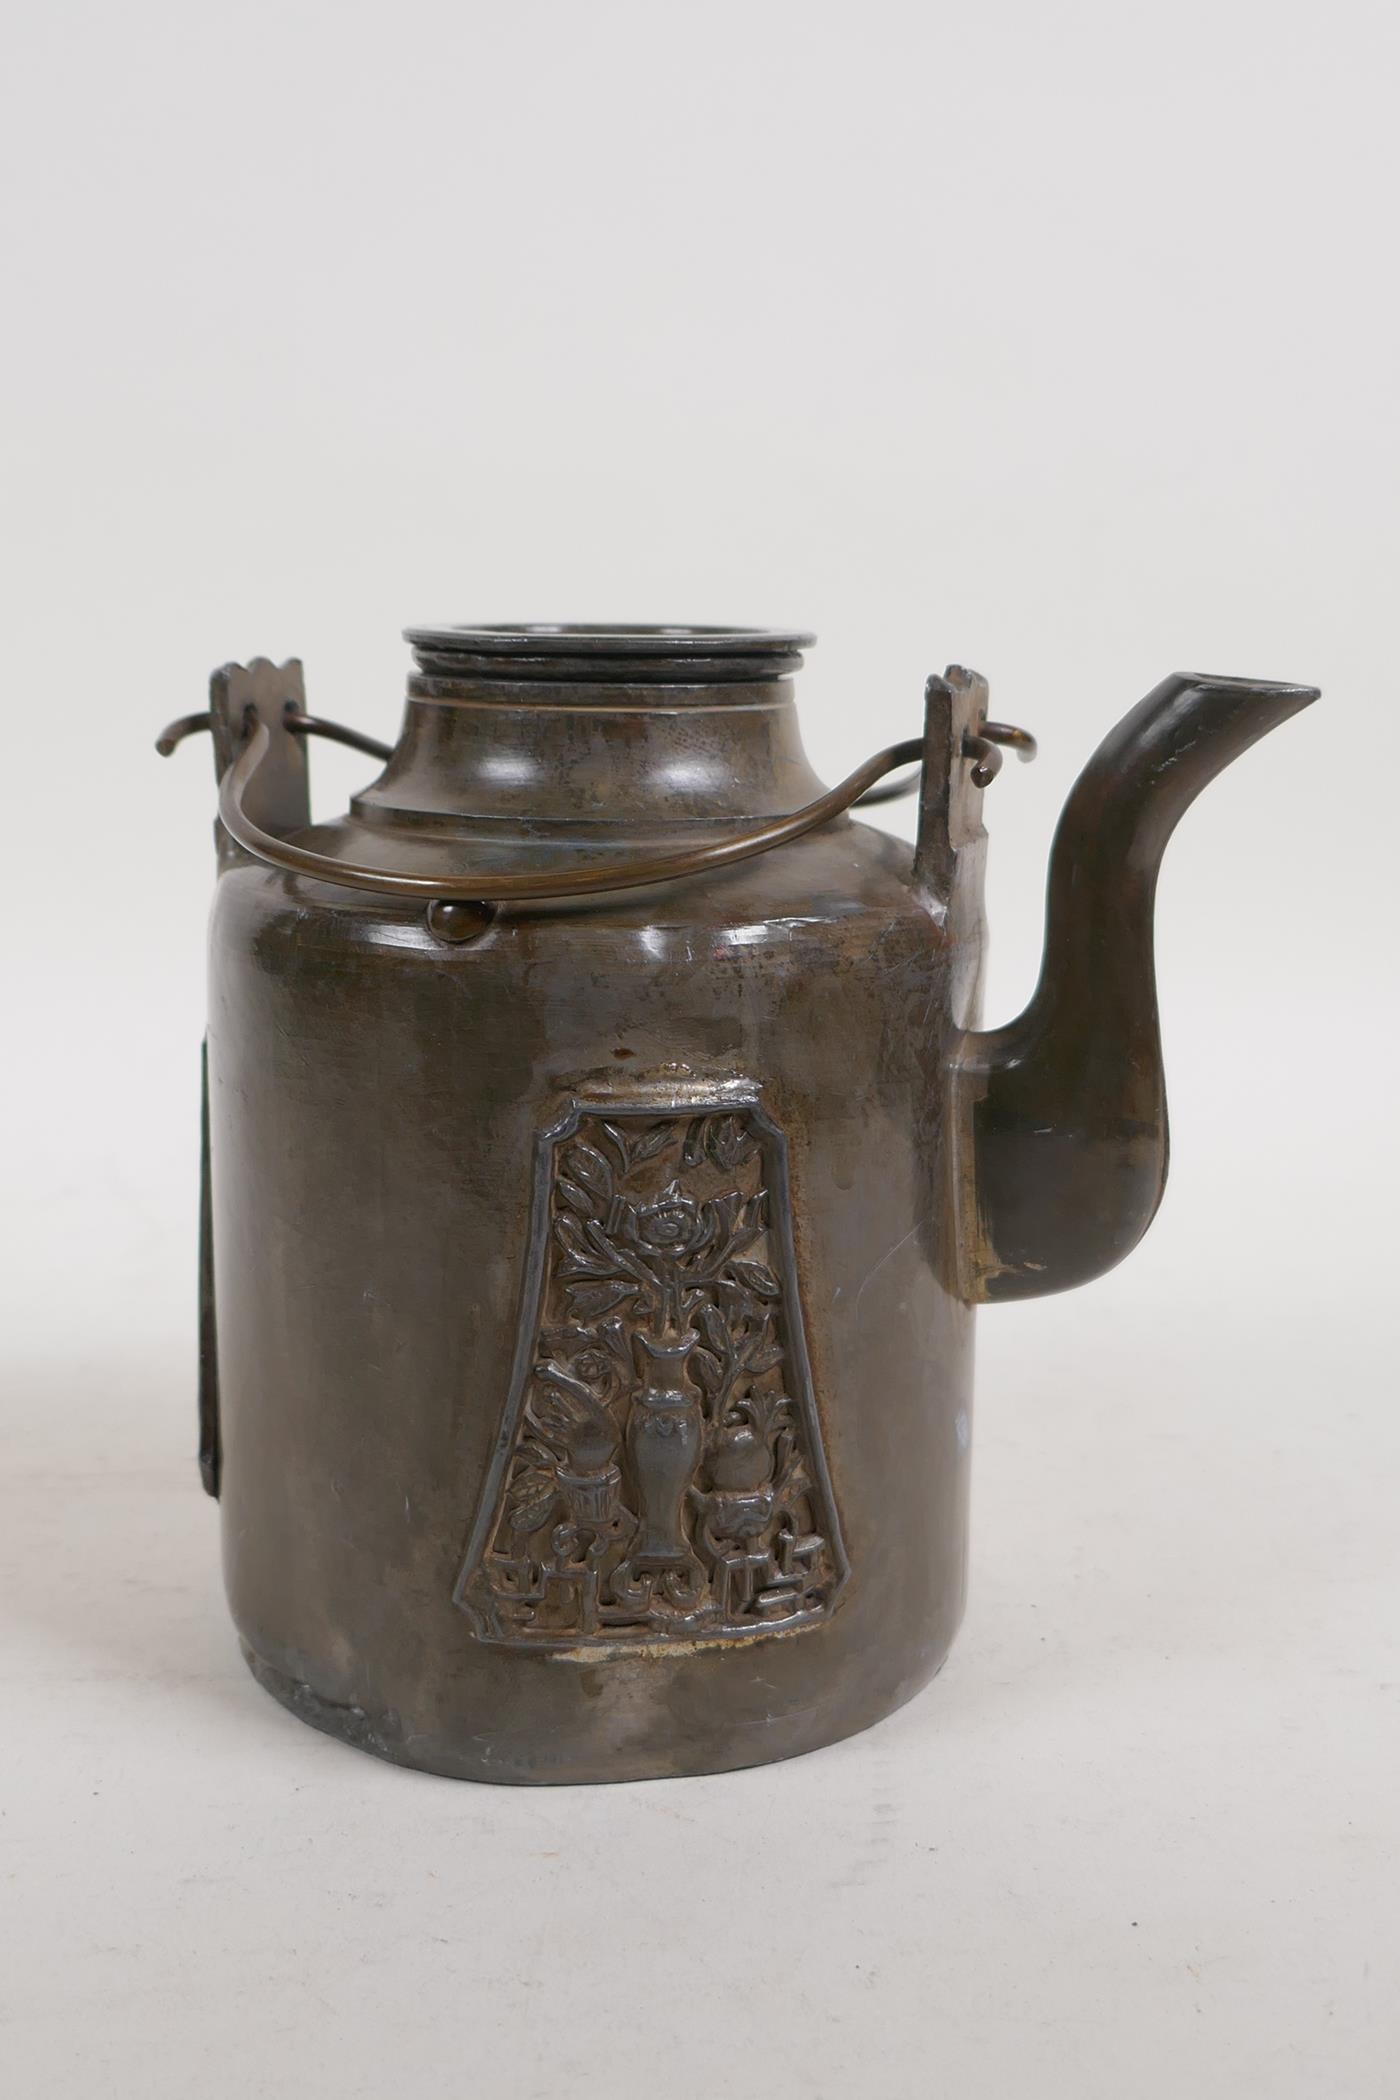 An antique Chinese pewter tea pot with applied decorative panels in relief and removable infuser/